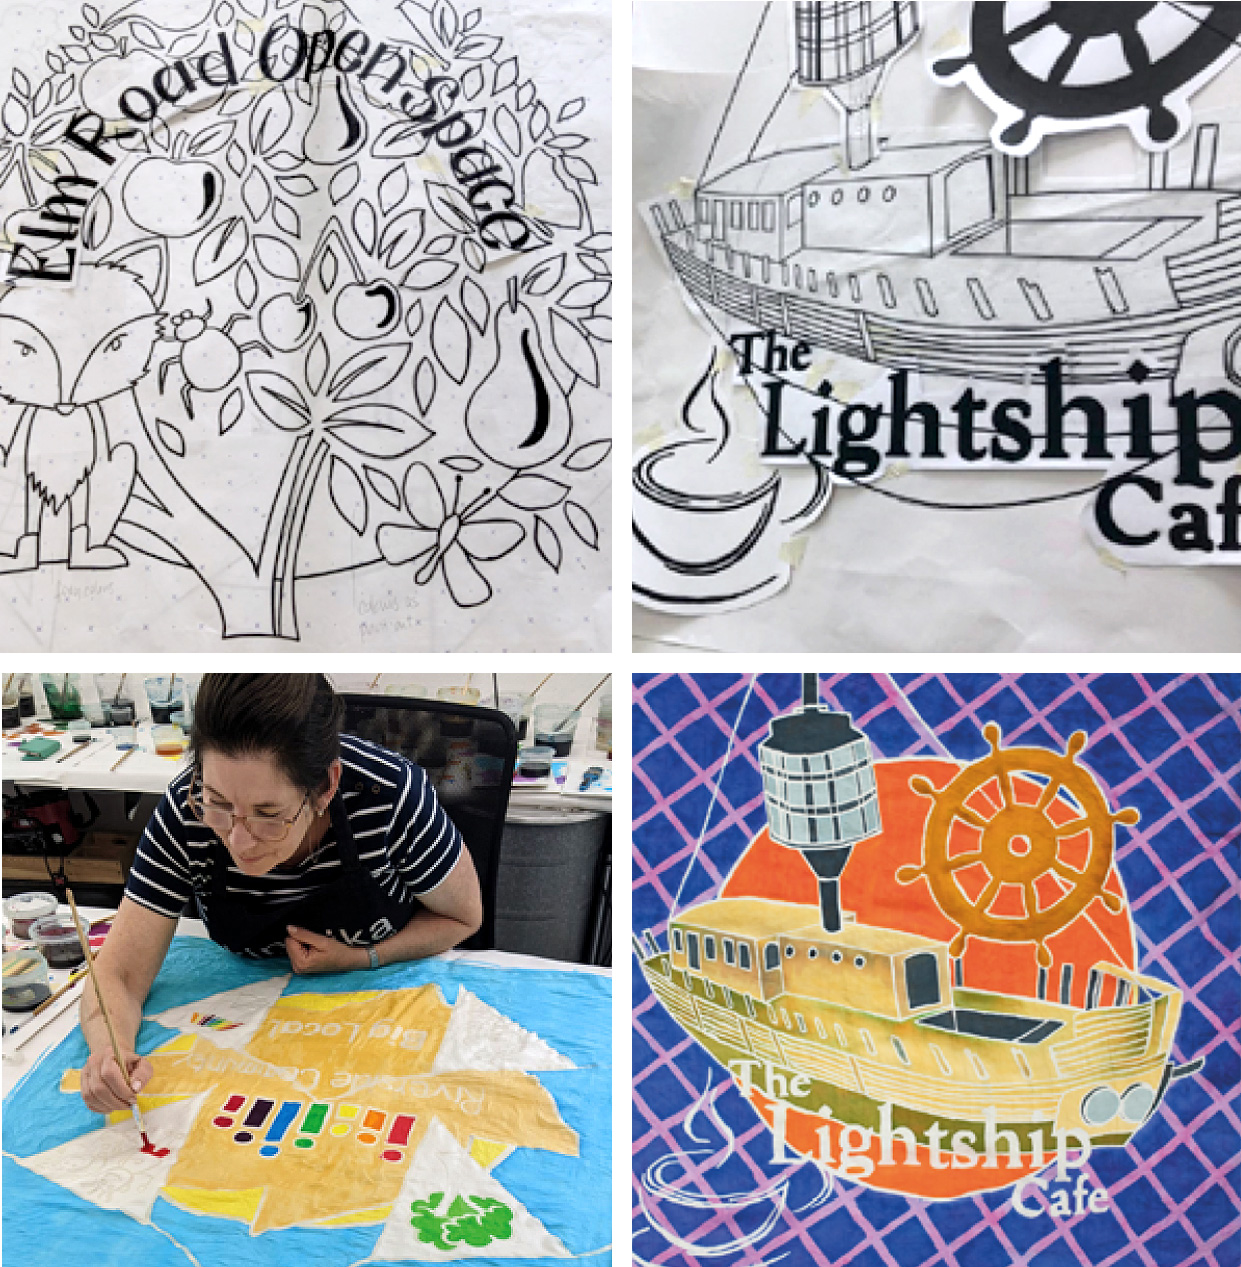 Group of 4 images showing how line drawings are made into flags